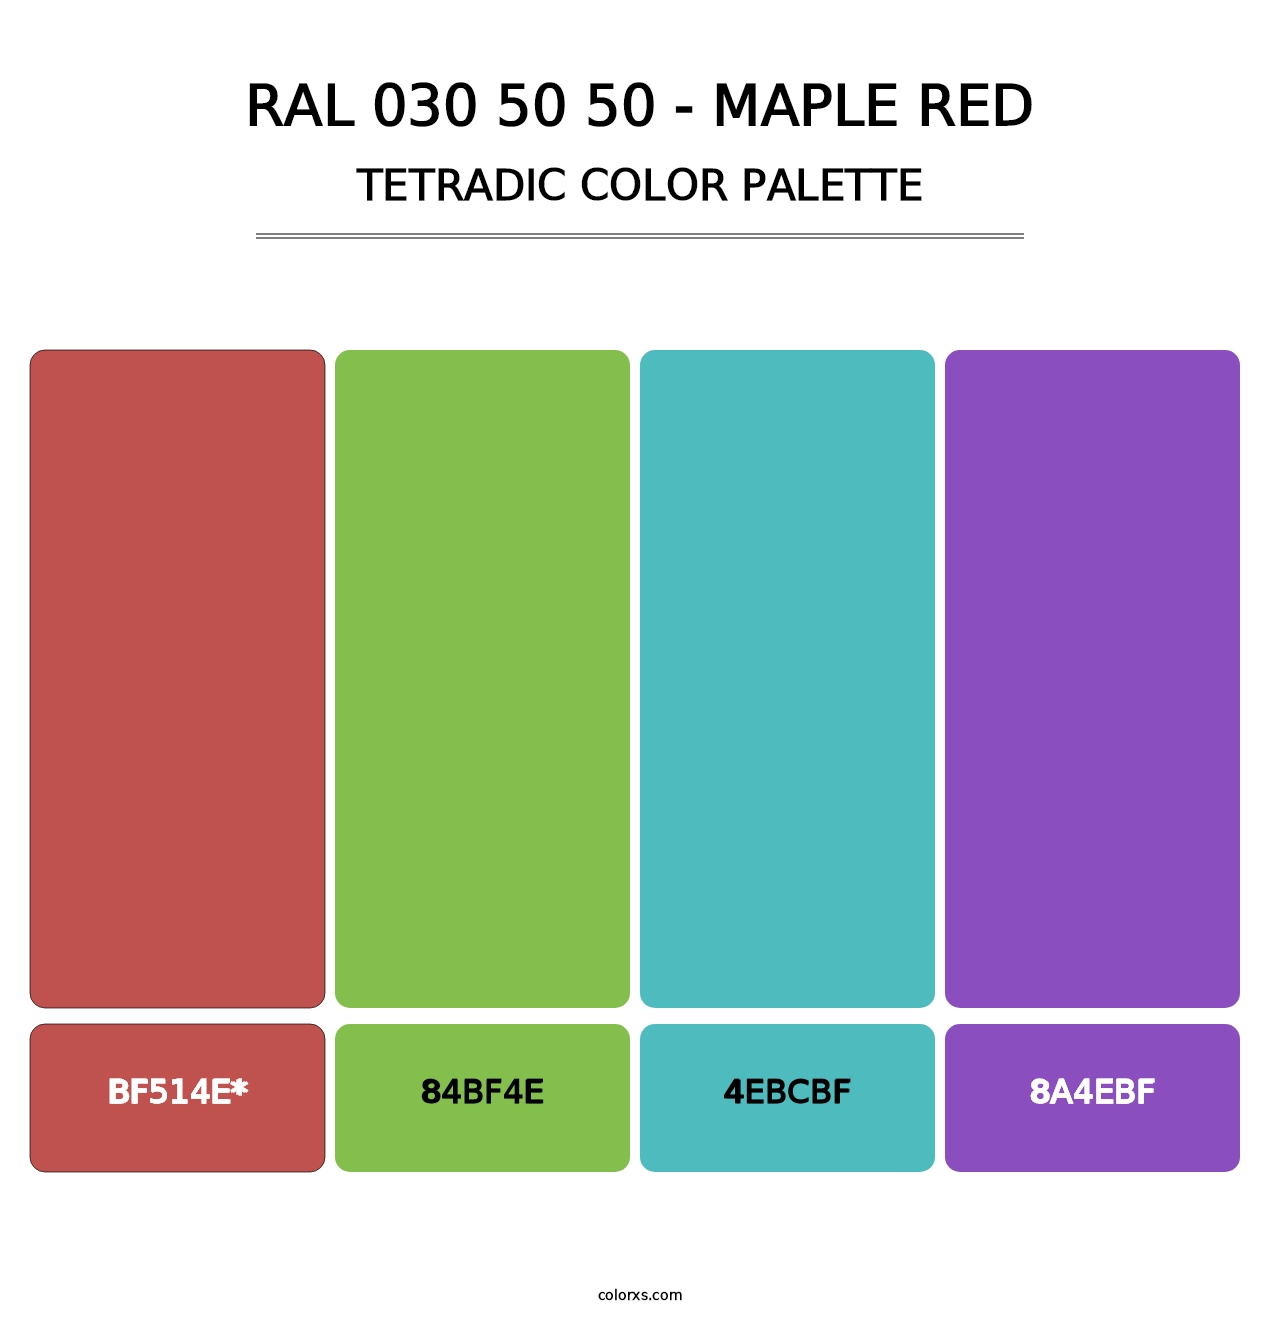 RAL 030 50 50 - Maple Red - Tetradic Color Palette